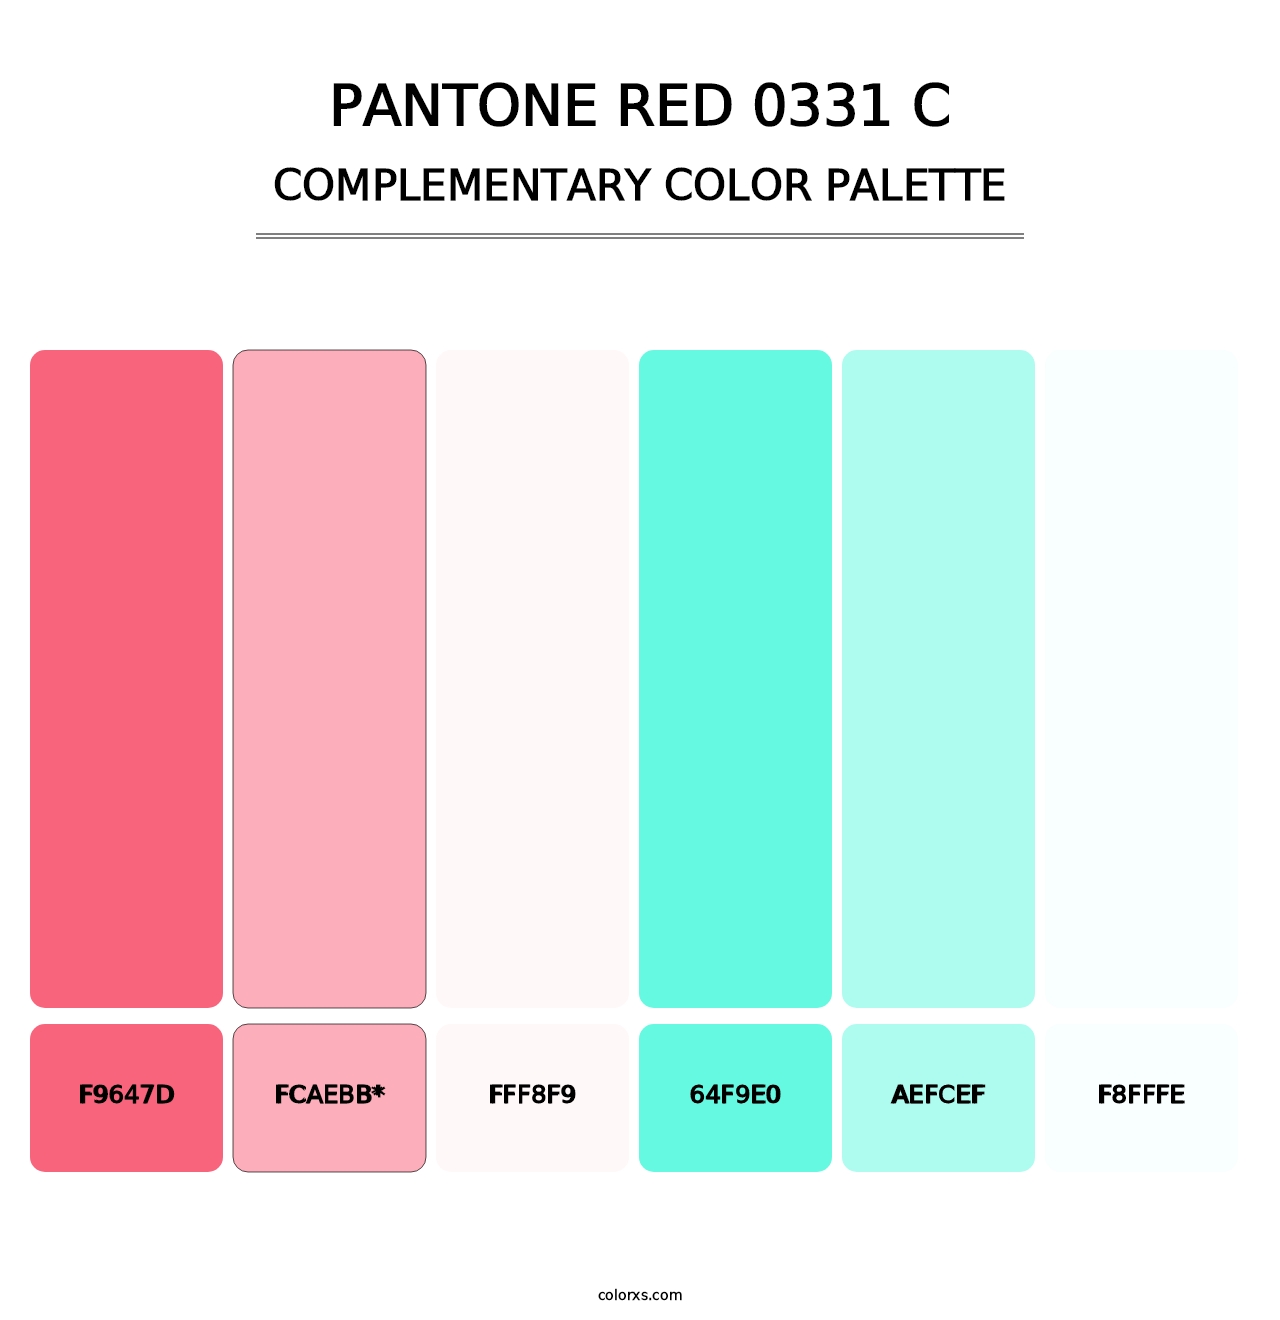 PANTONE Red 0331 C - Complementary Color Palette